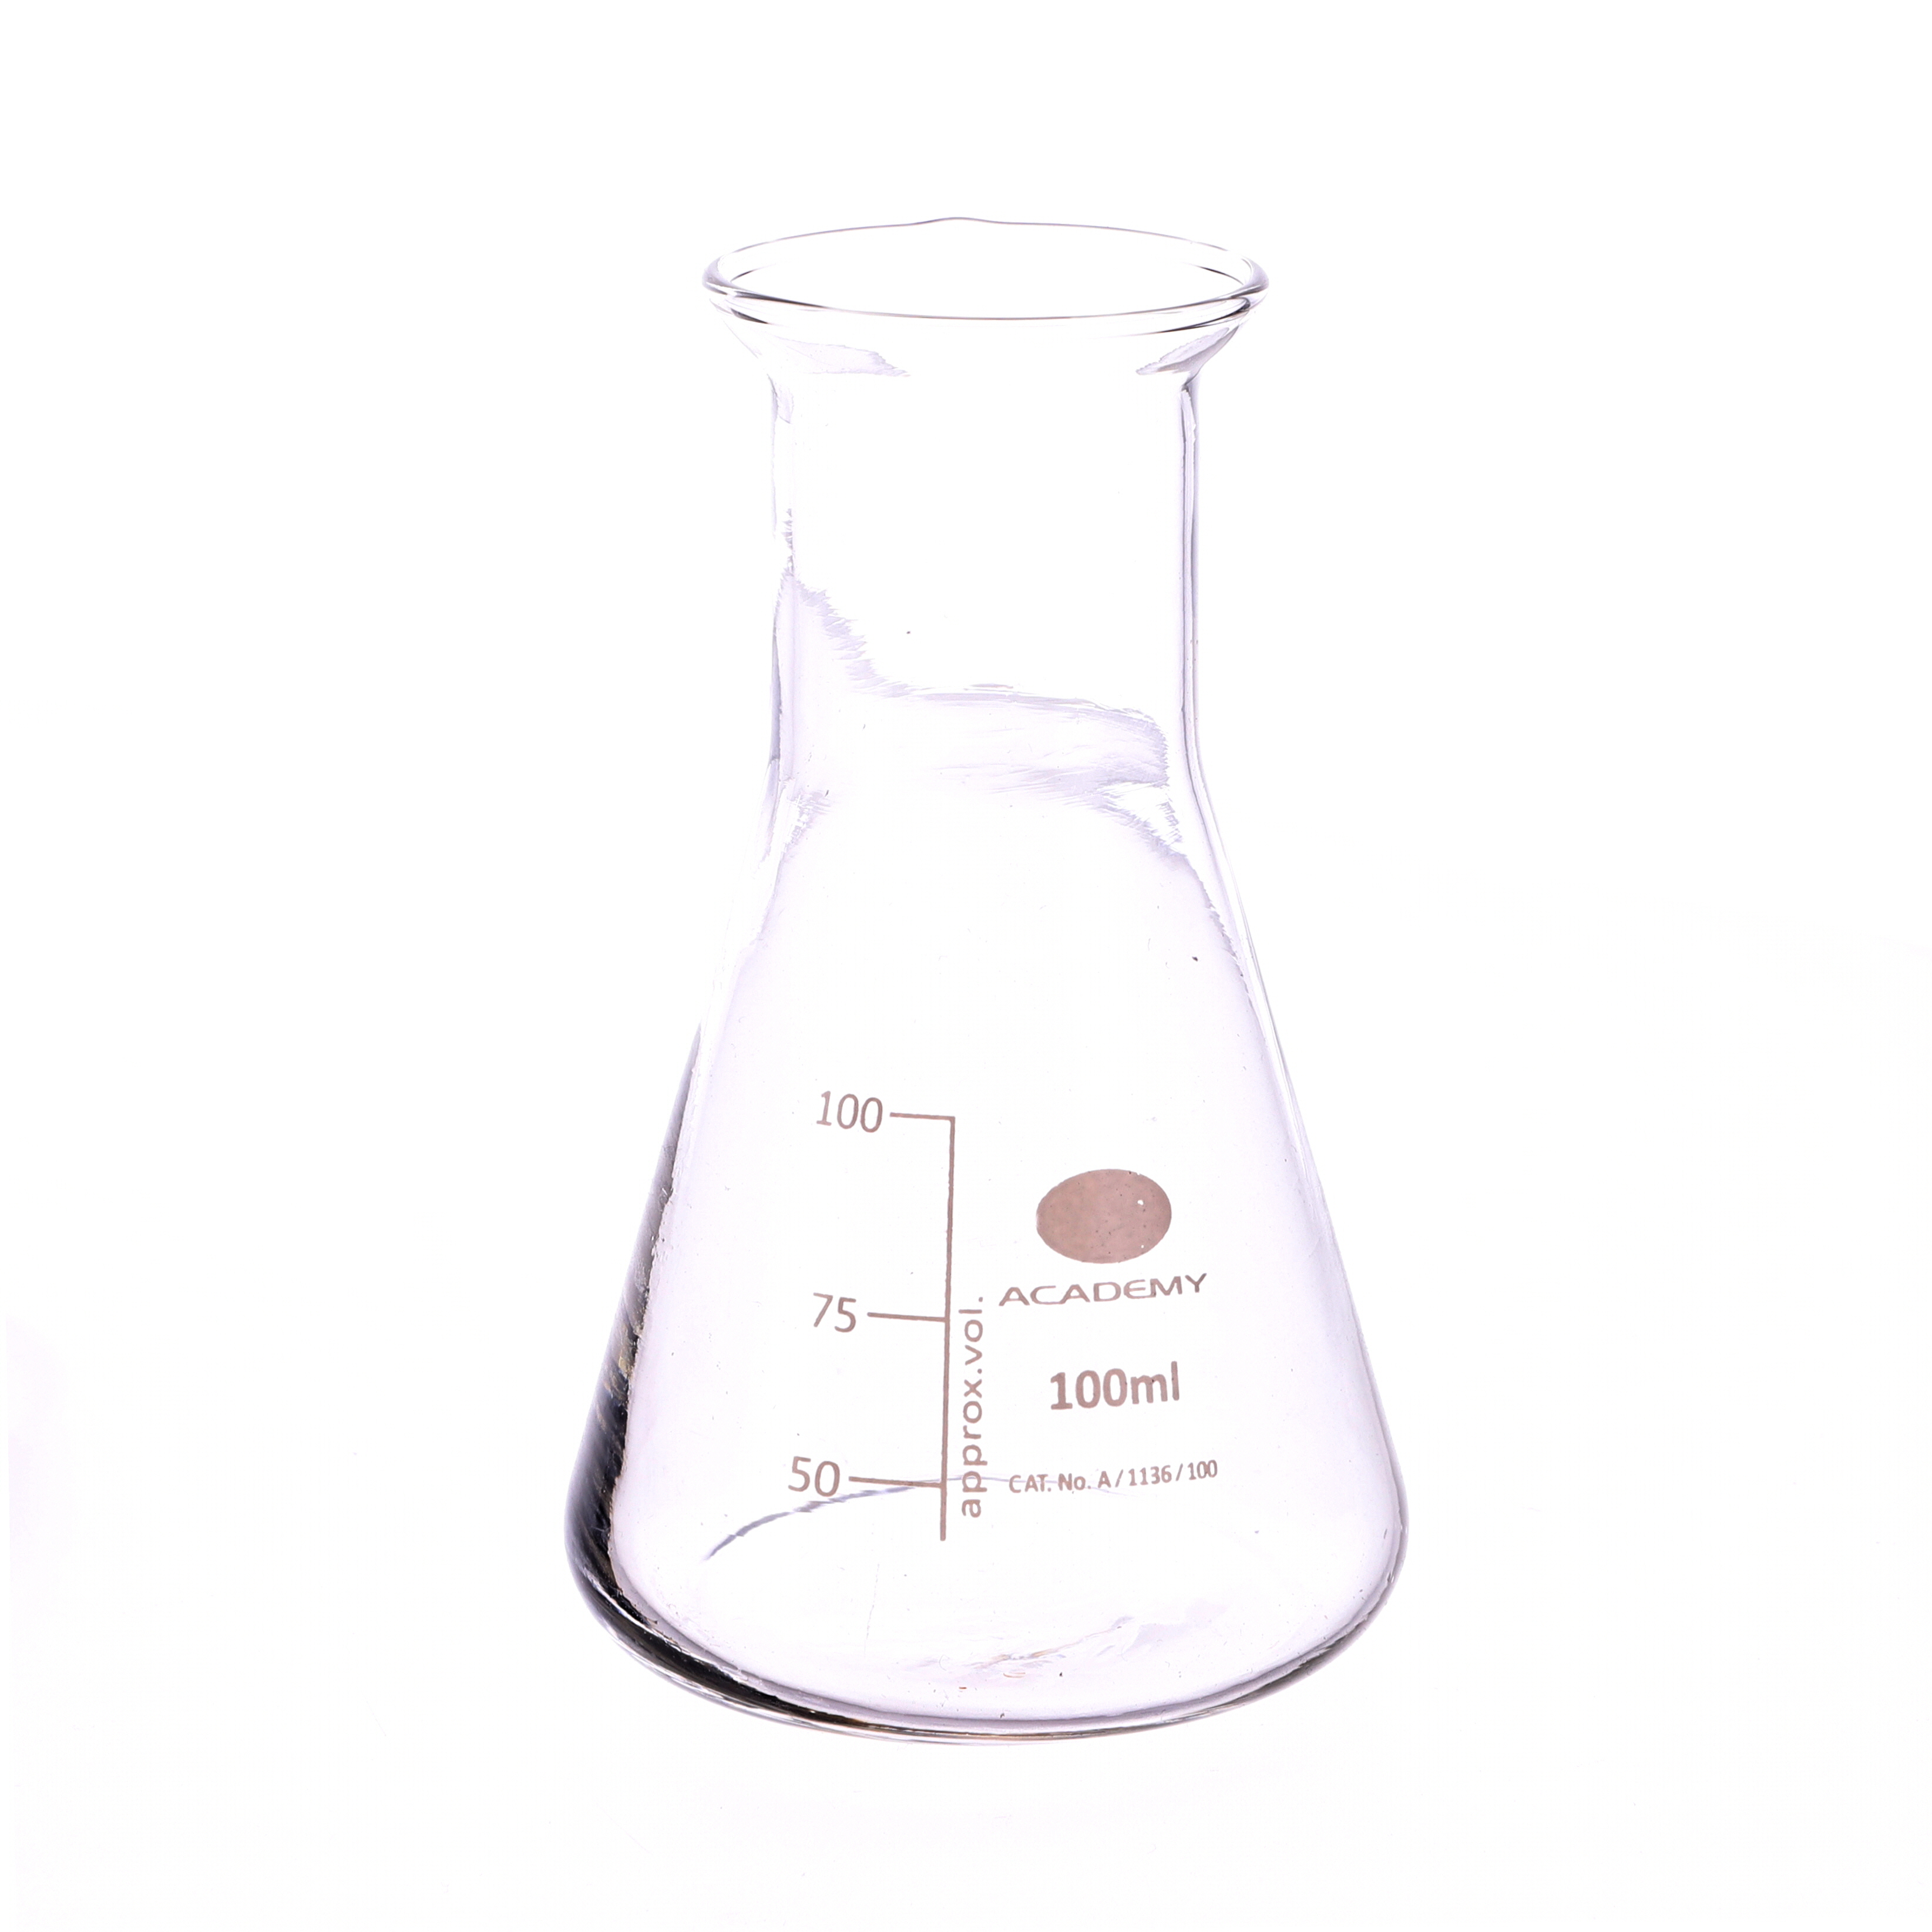 Econ Nmouth Conflask 100ml P12